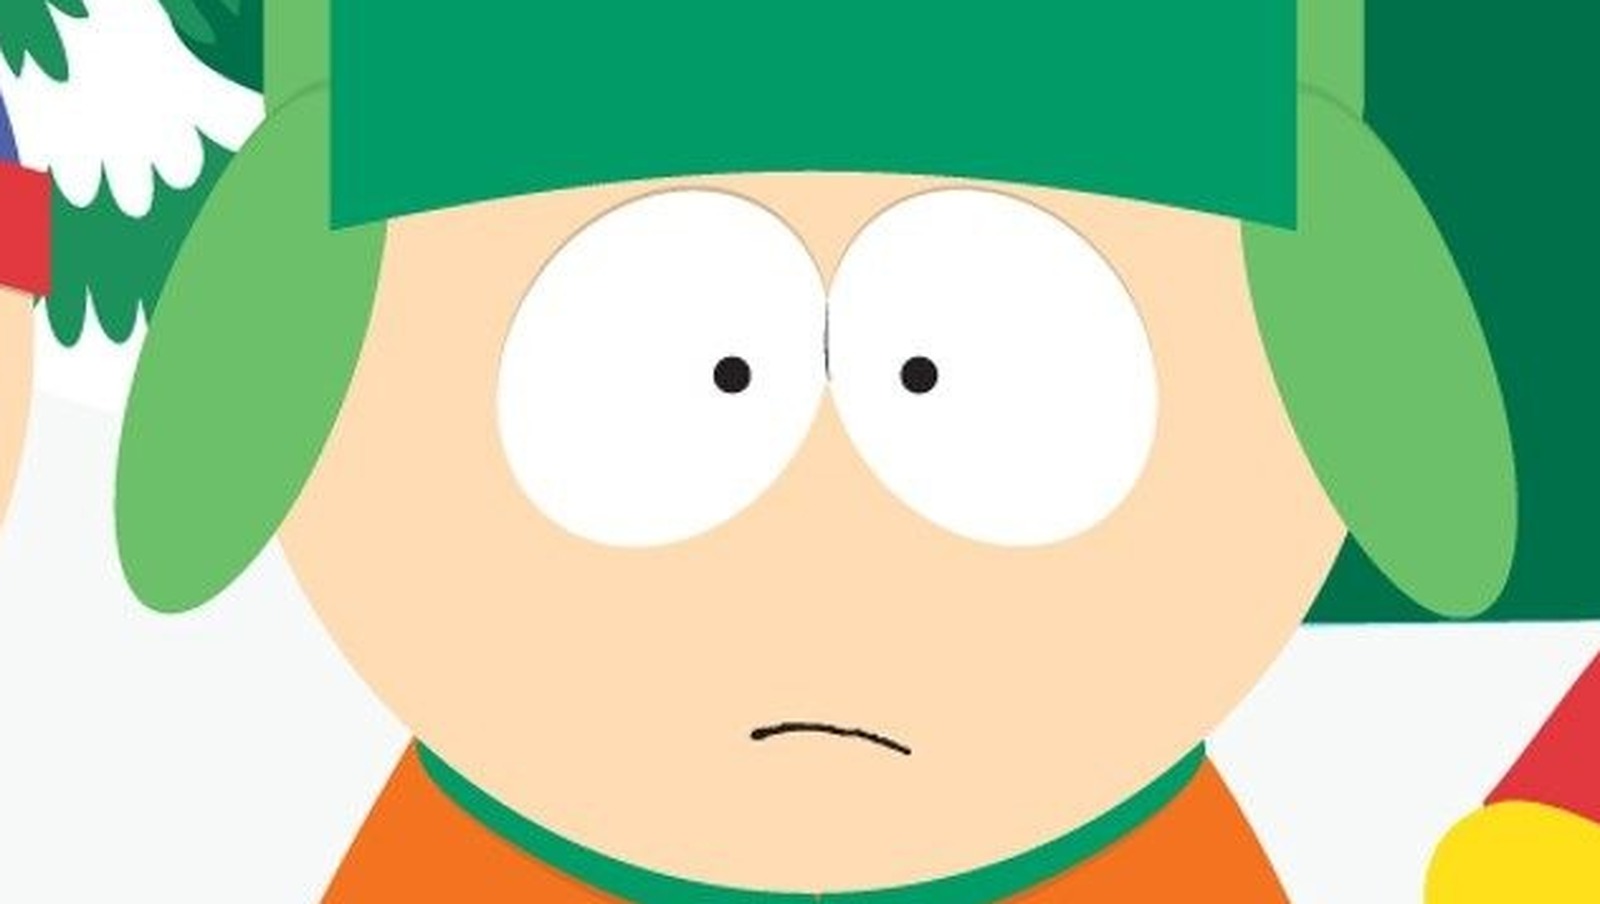 10 South Park Episodes That Went Too Far